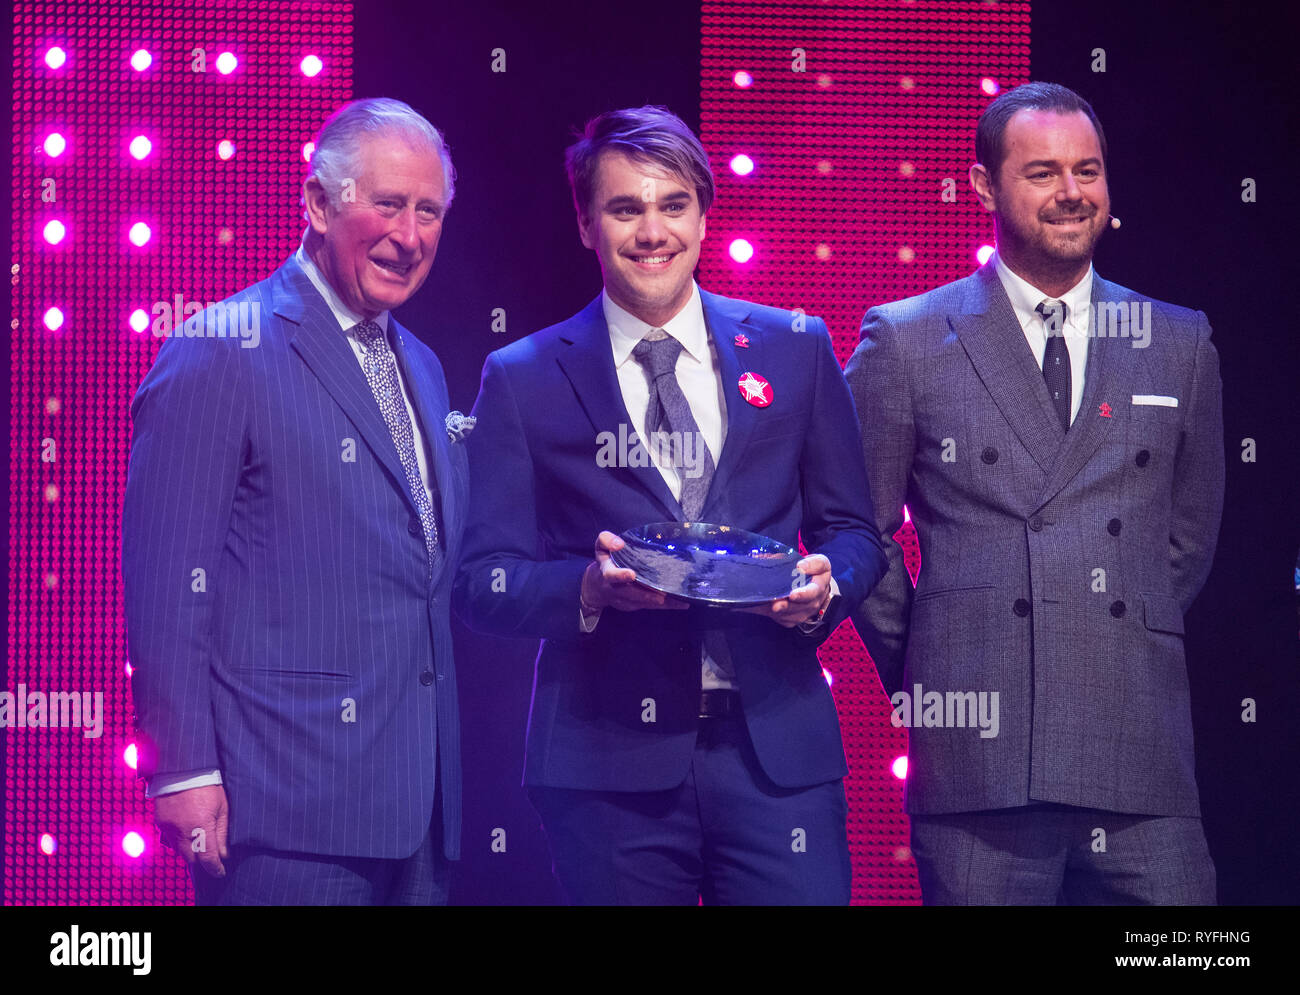 The Prince of Wales with Danny Dyer (right) and winner of Mentor of the Year Award Rahul Mehra onstage at the annual Prince's Trust Awards at the London Palladium. Stock Photo